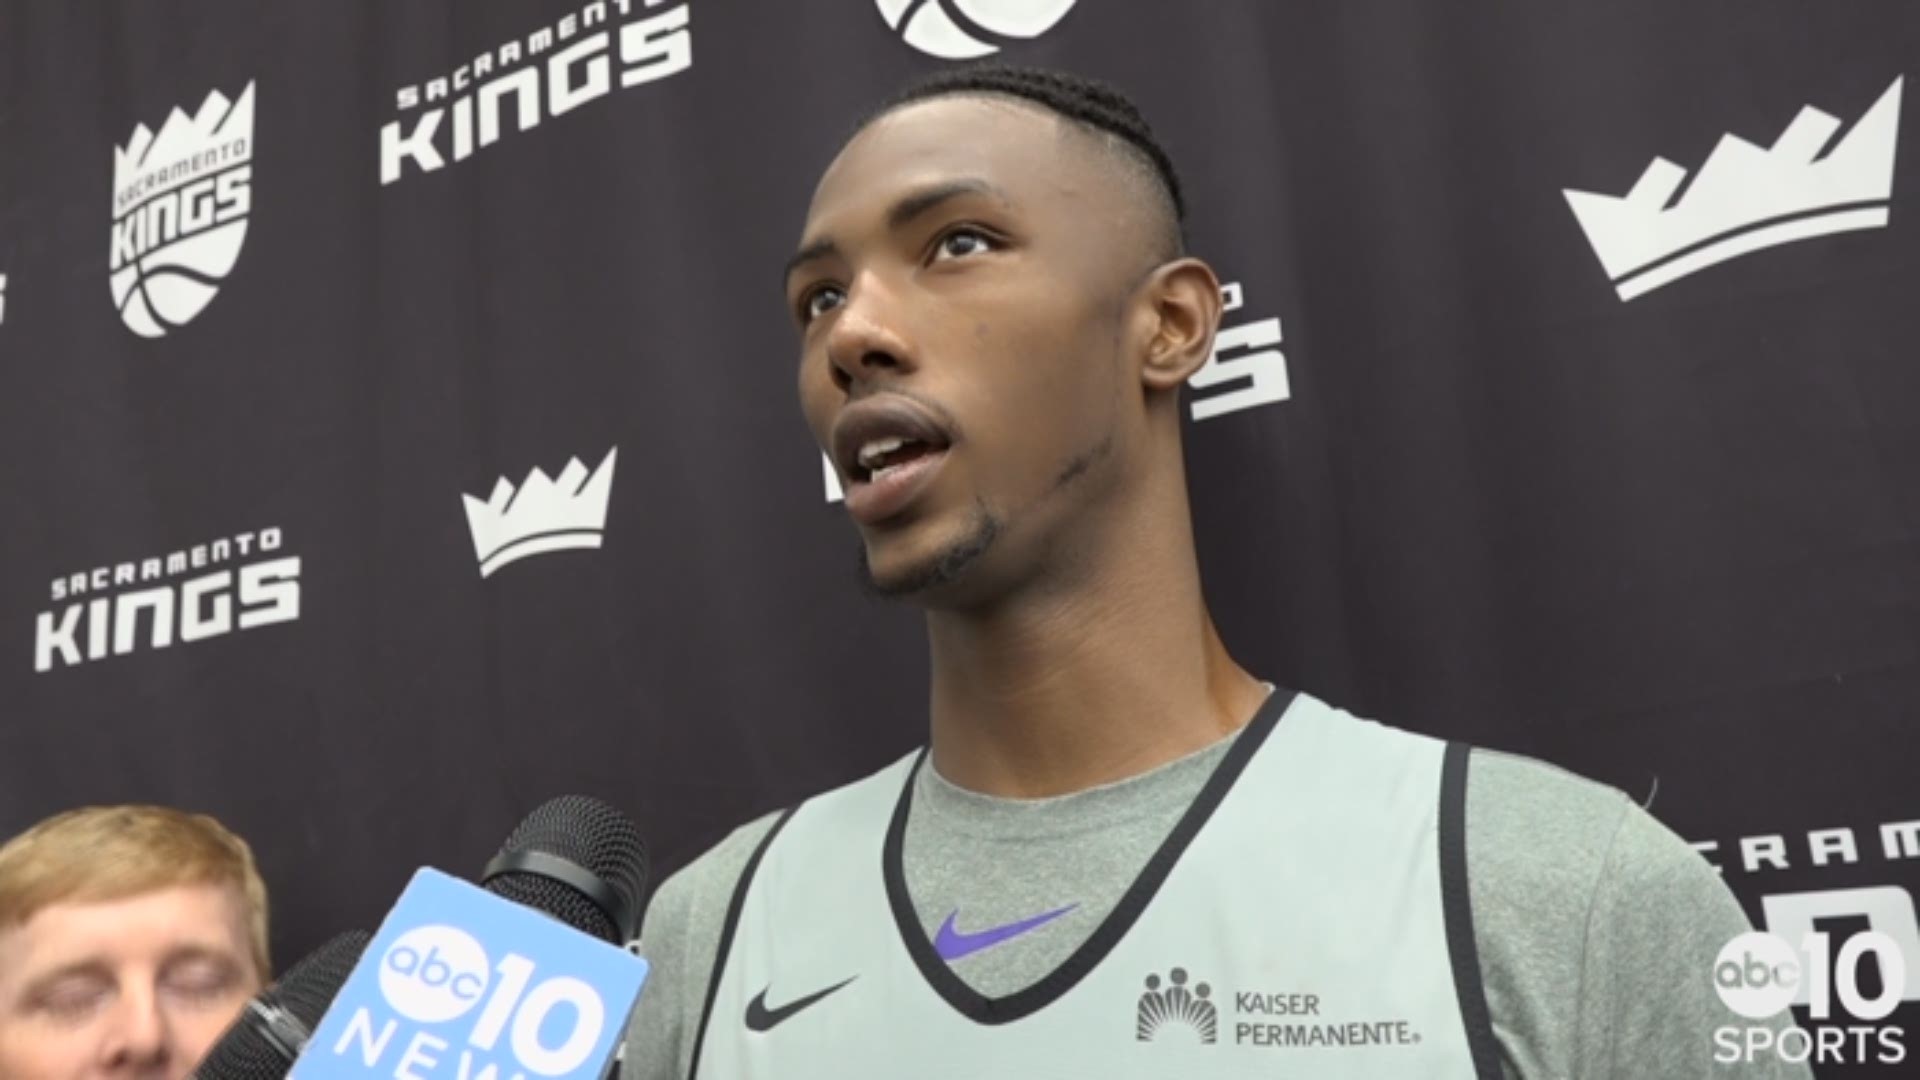 Kings forward Harry Giles gives his thoughts about the first few days of training camp, looking ahead to getting game action, the level of competition and coach Dave Joerger losing his voice.